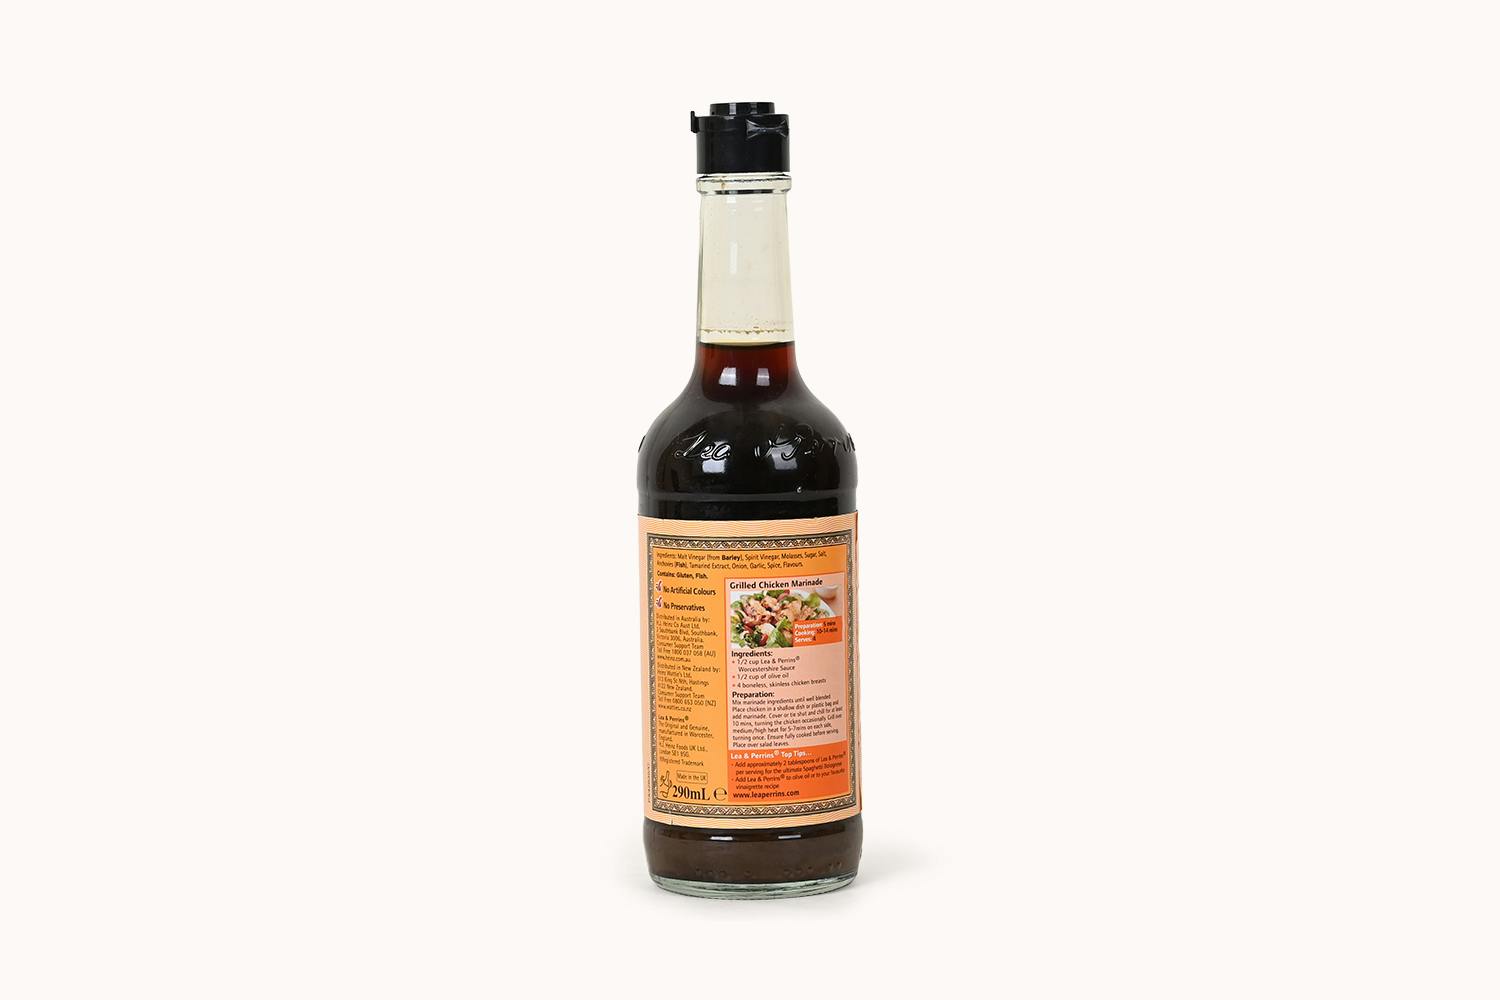 /l/e/lea-and-perrins-sauce-worcestershire-290ml-2_t8ctehdv8apfibtf.jpg